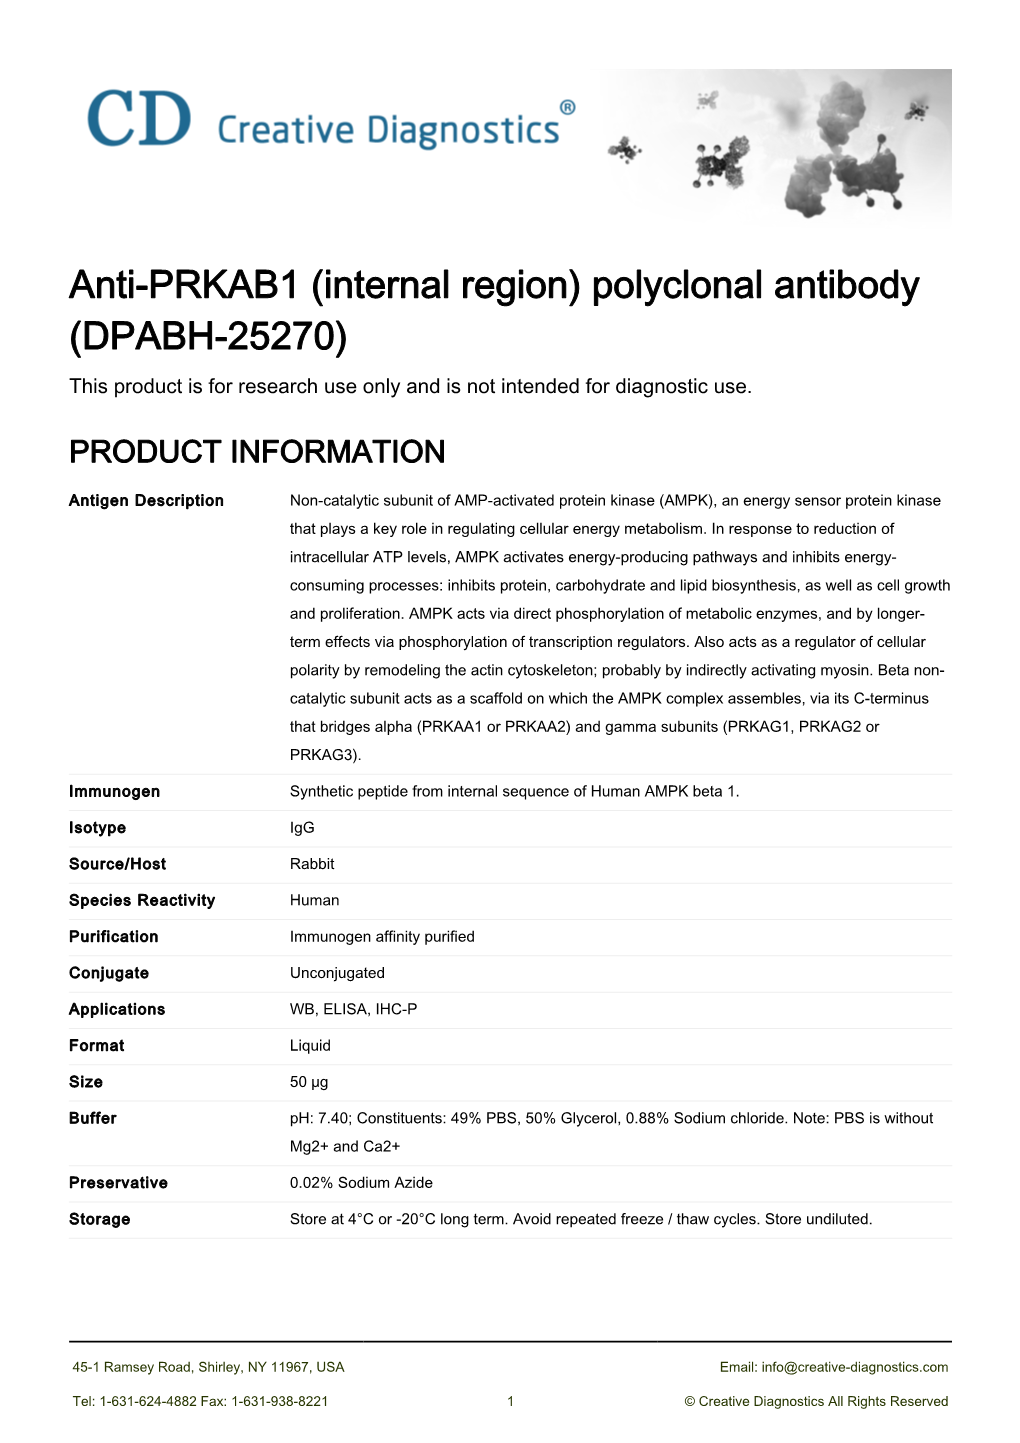 Anti-PRKAB1 (Internal Region) Polyclonal Antibody (DPABH-25270) This Product Is for Research Use Only and Is Not Intended for Diagnostic Use